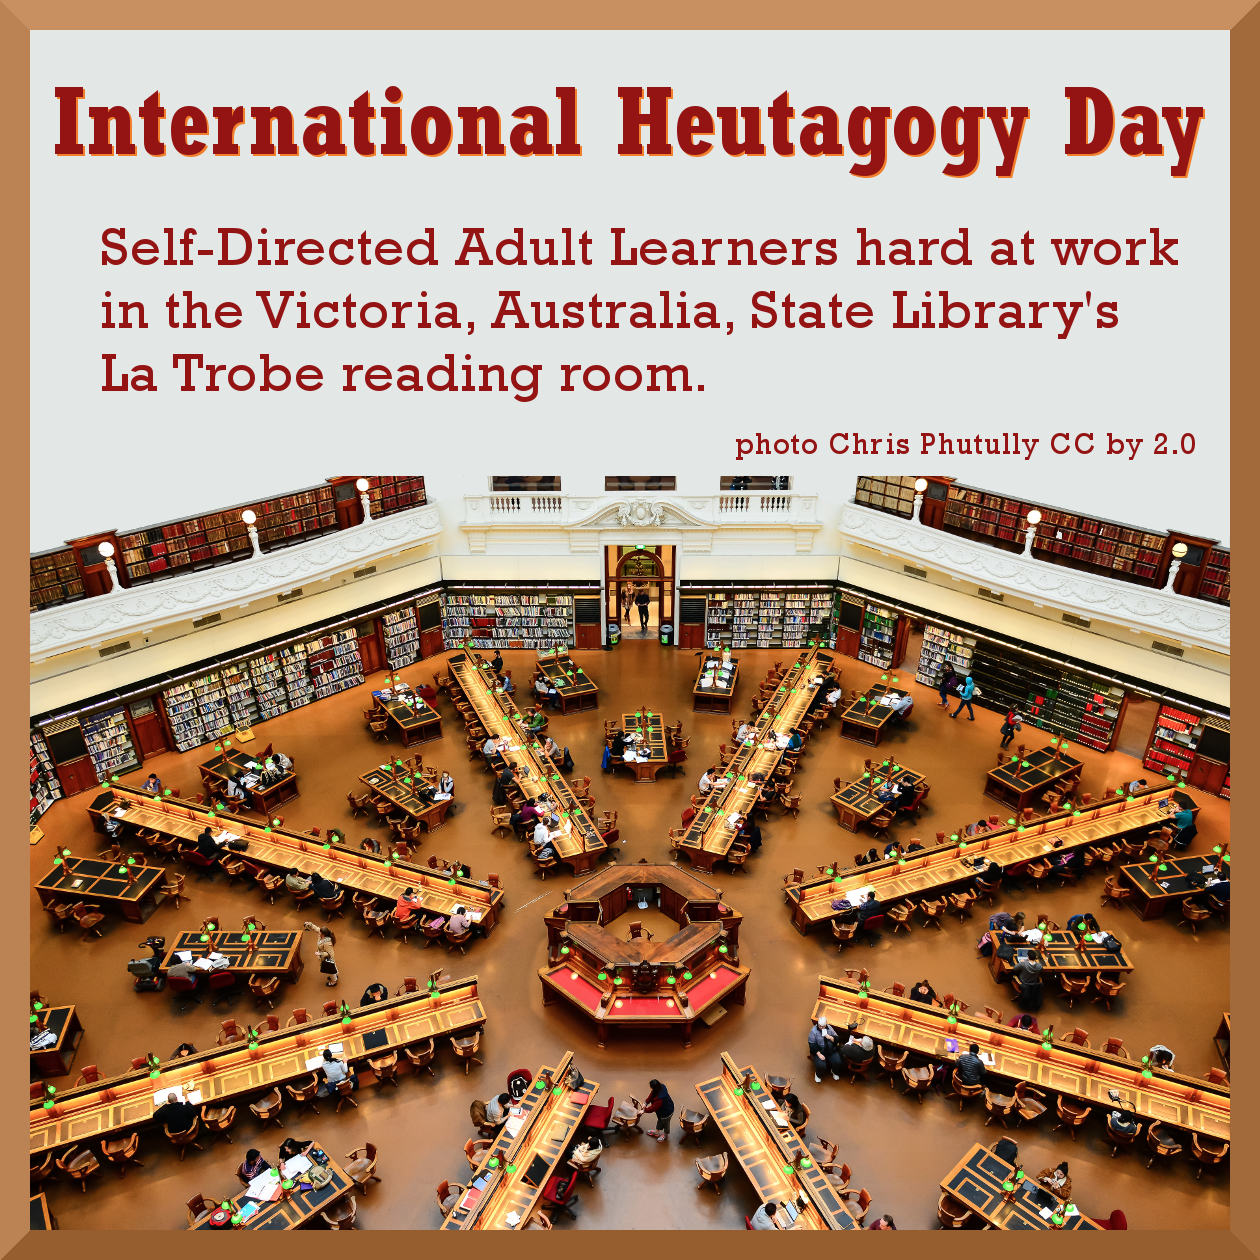 Self-Directed Adult Learners hard at work in Victoria, Australia, State Library's La Trobe reading room.